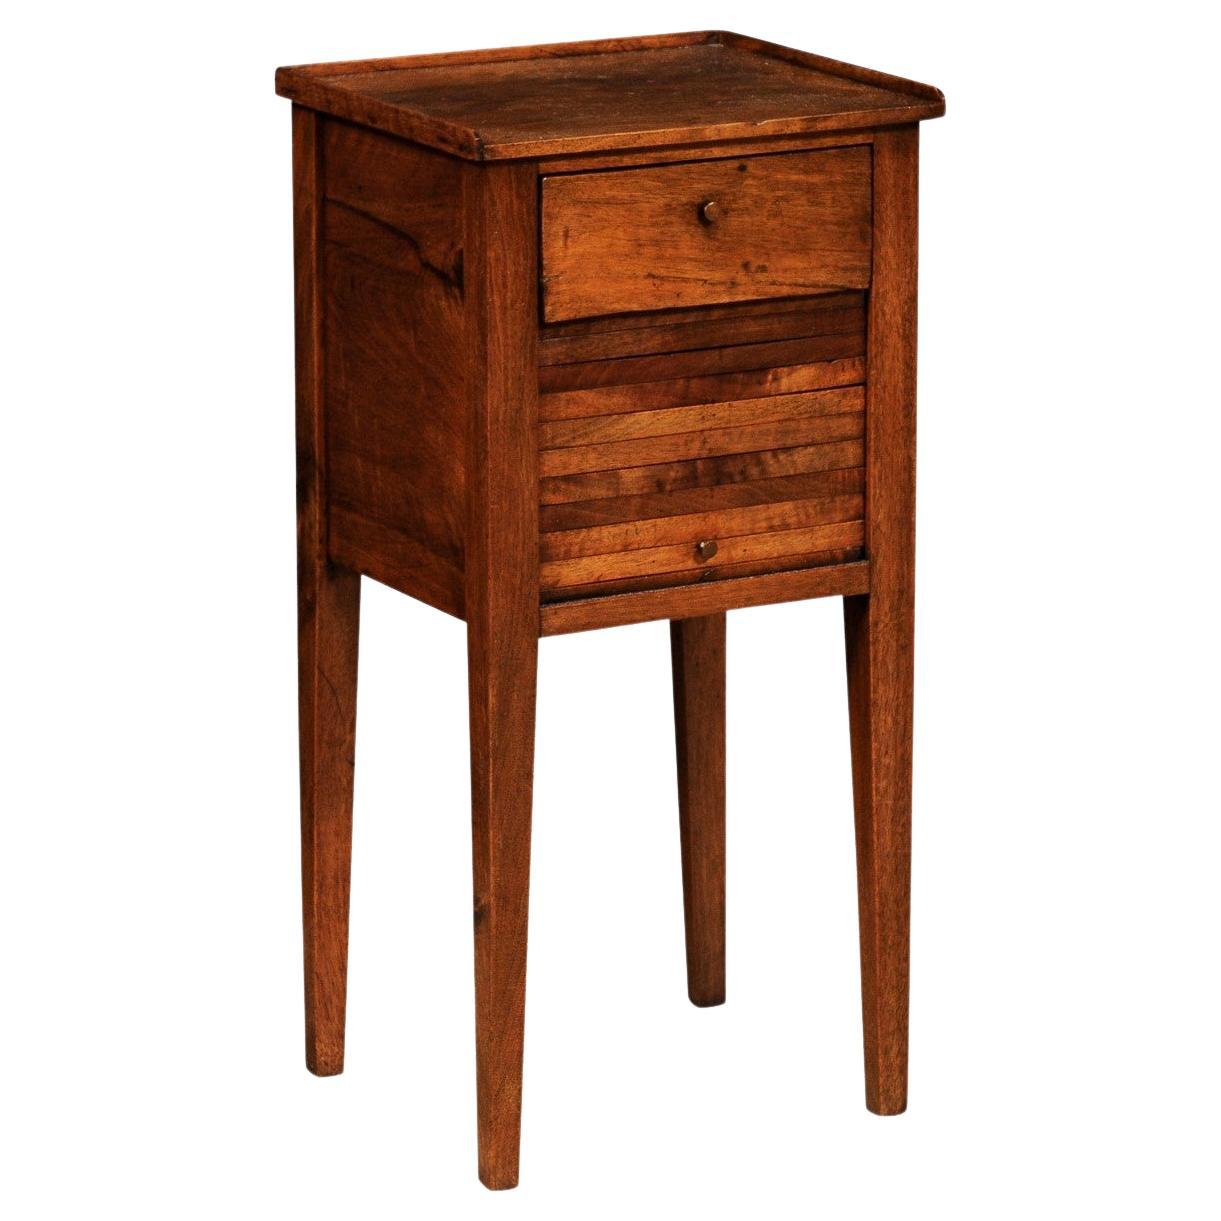 18th Century Italian Walnut Bedside Table with Single Drawer and Tambour Door For Sale